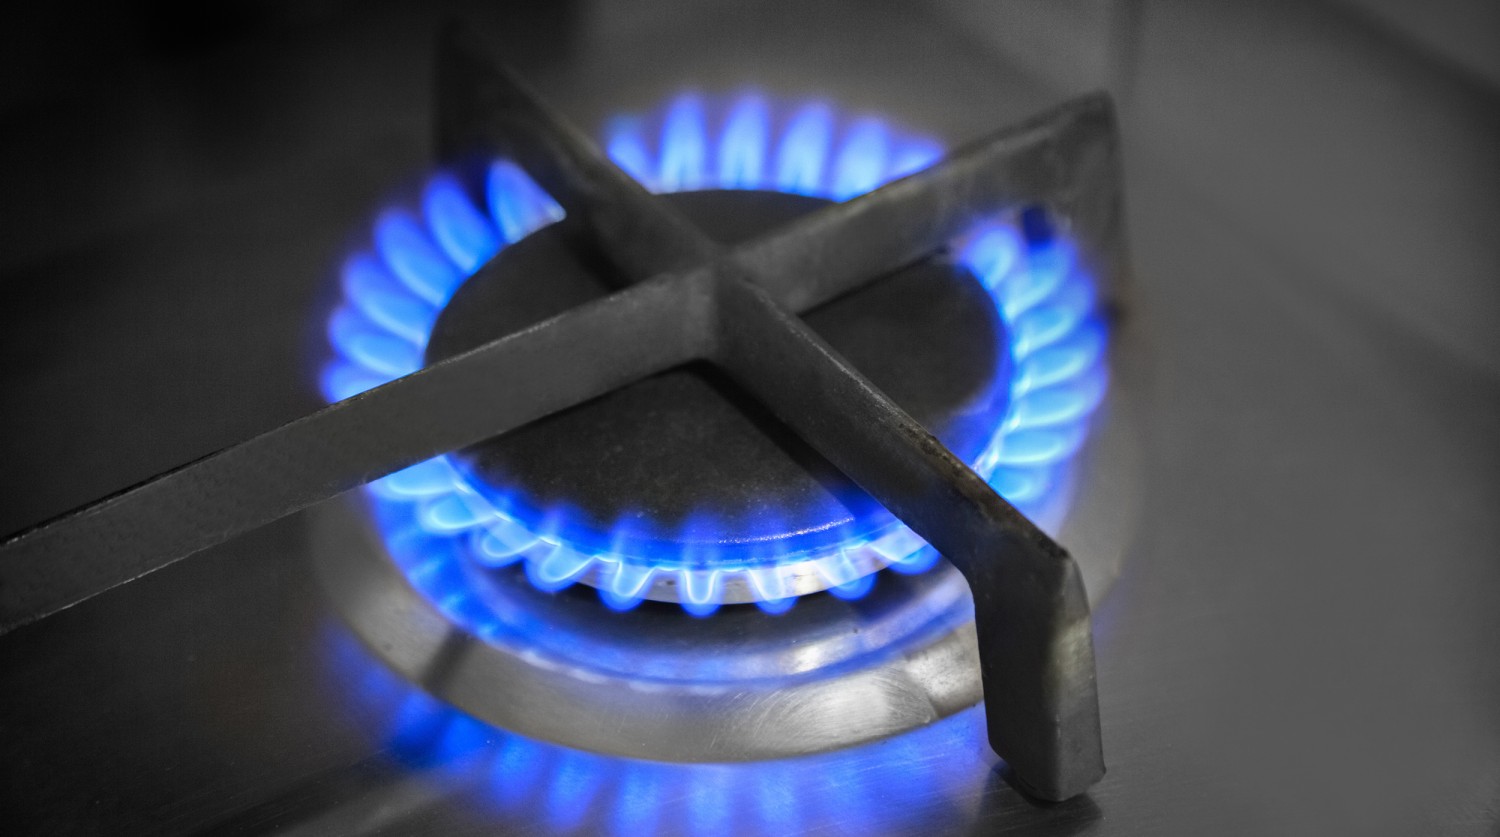 Can Gas Ovens Make You Sick? Health Experts Explain Gas Stove Risks